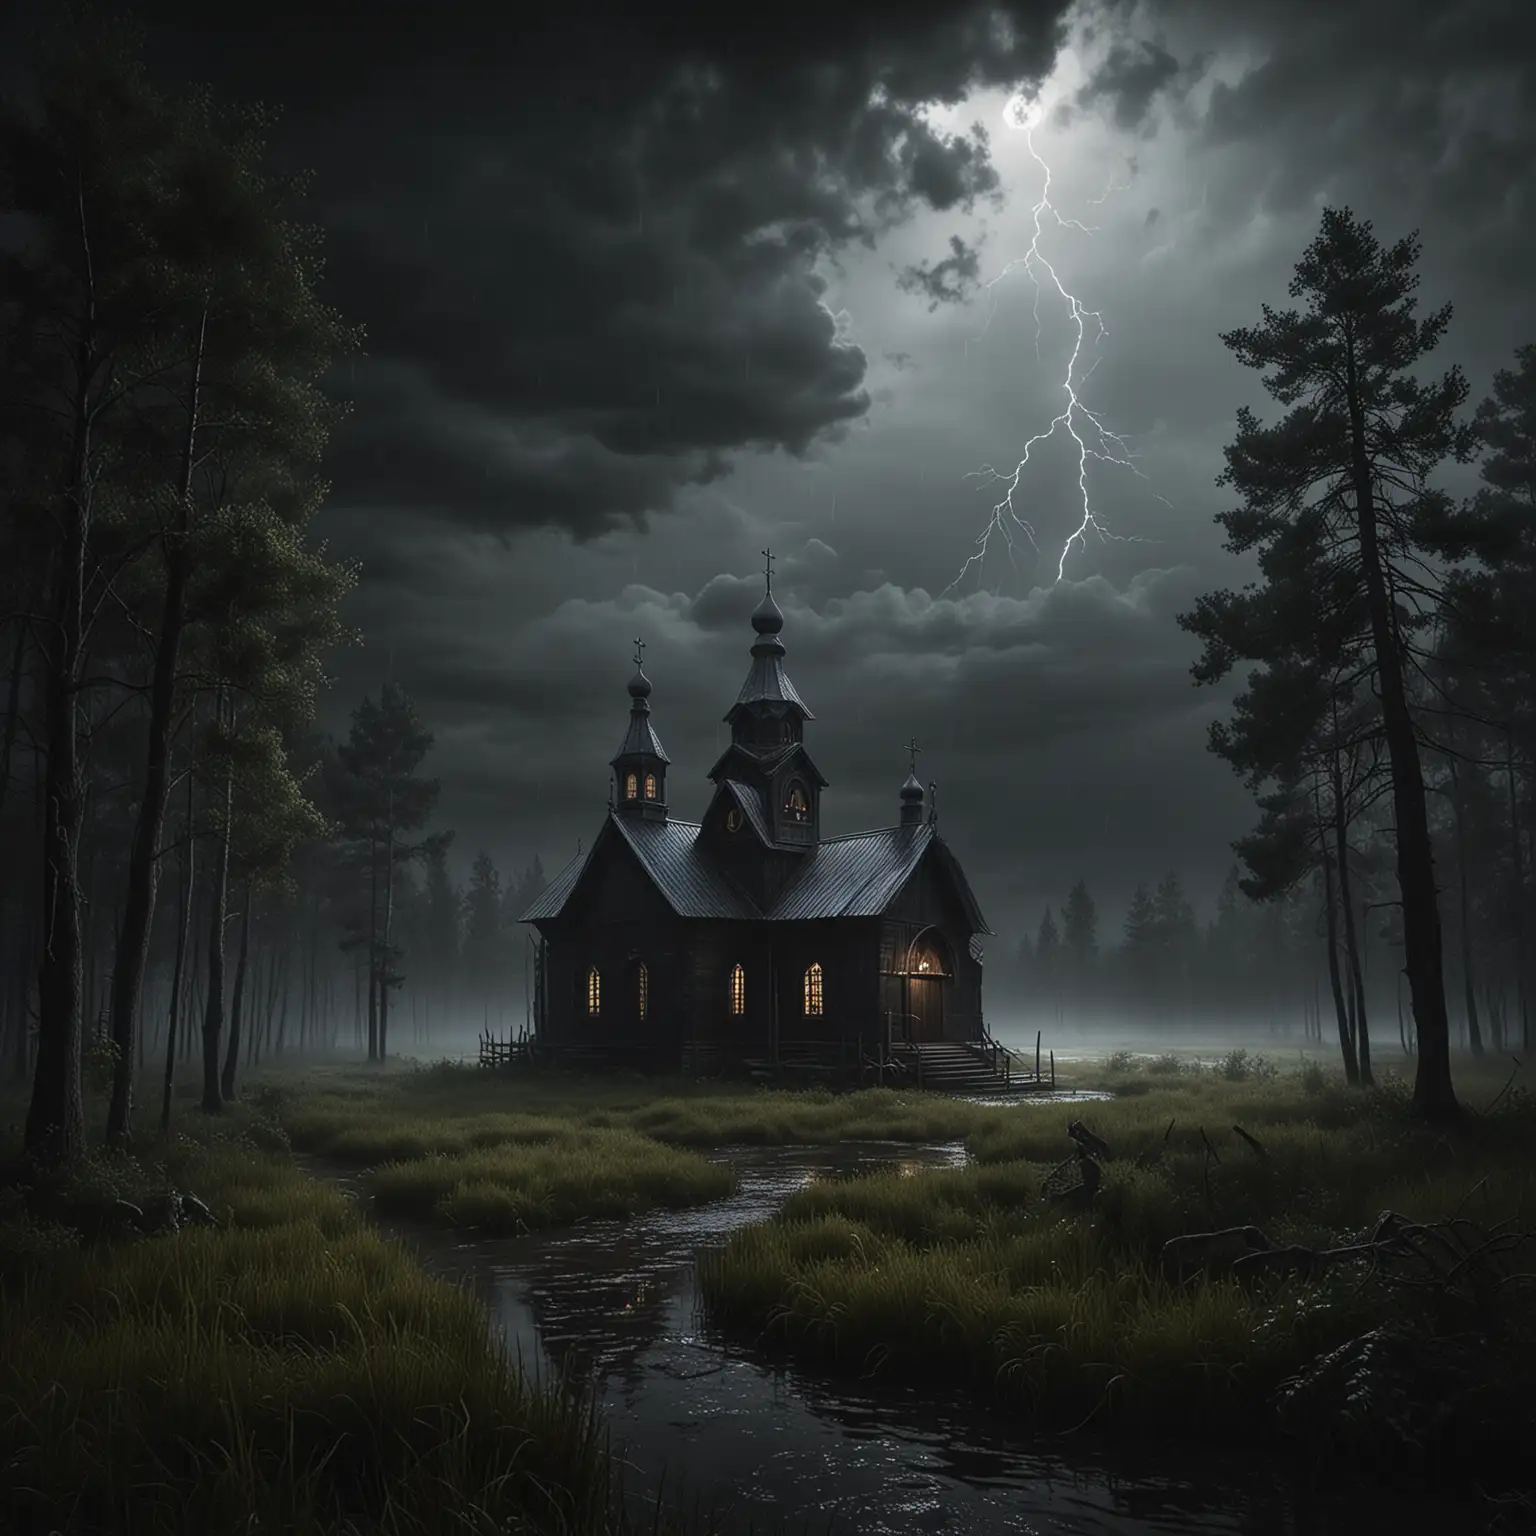 Eerie Night at the Greek Style Orthodox Church in the Dark Forest